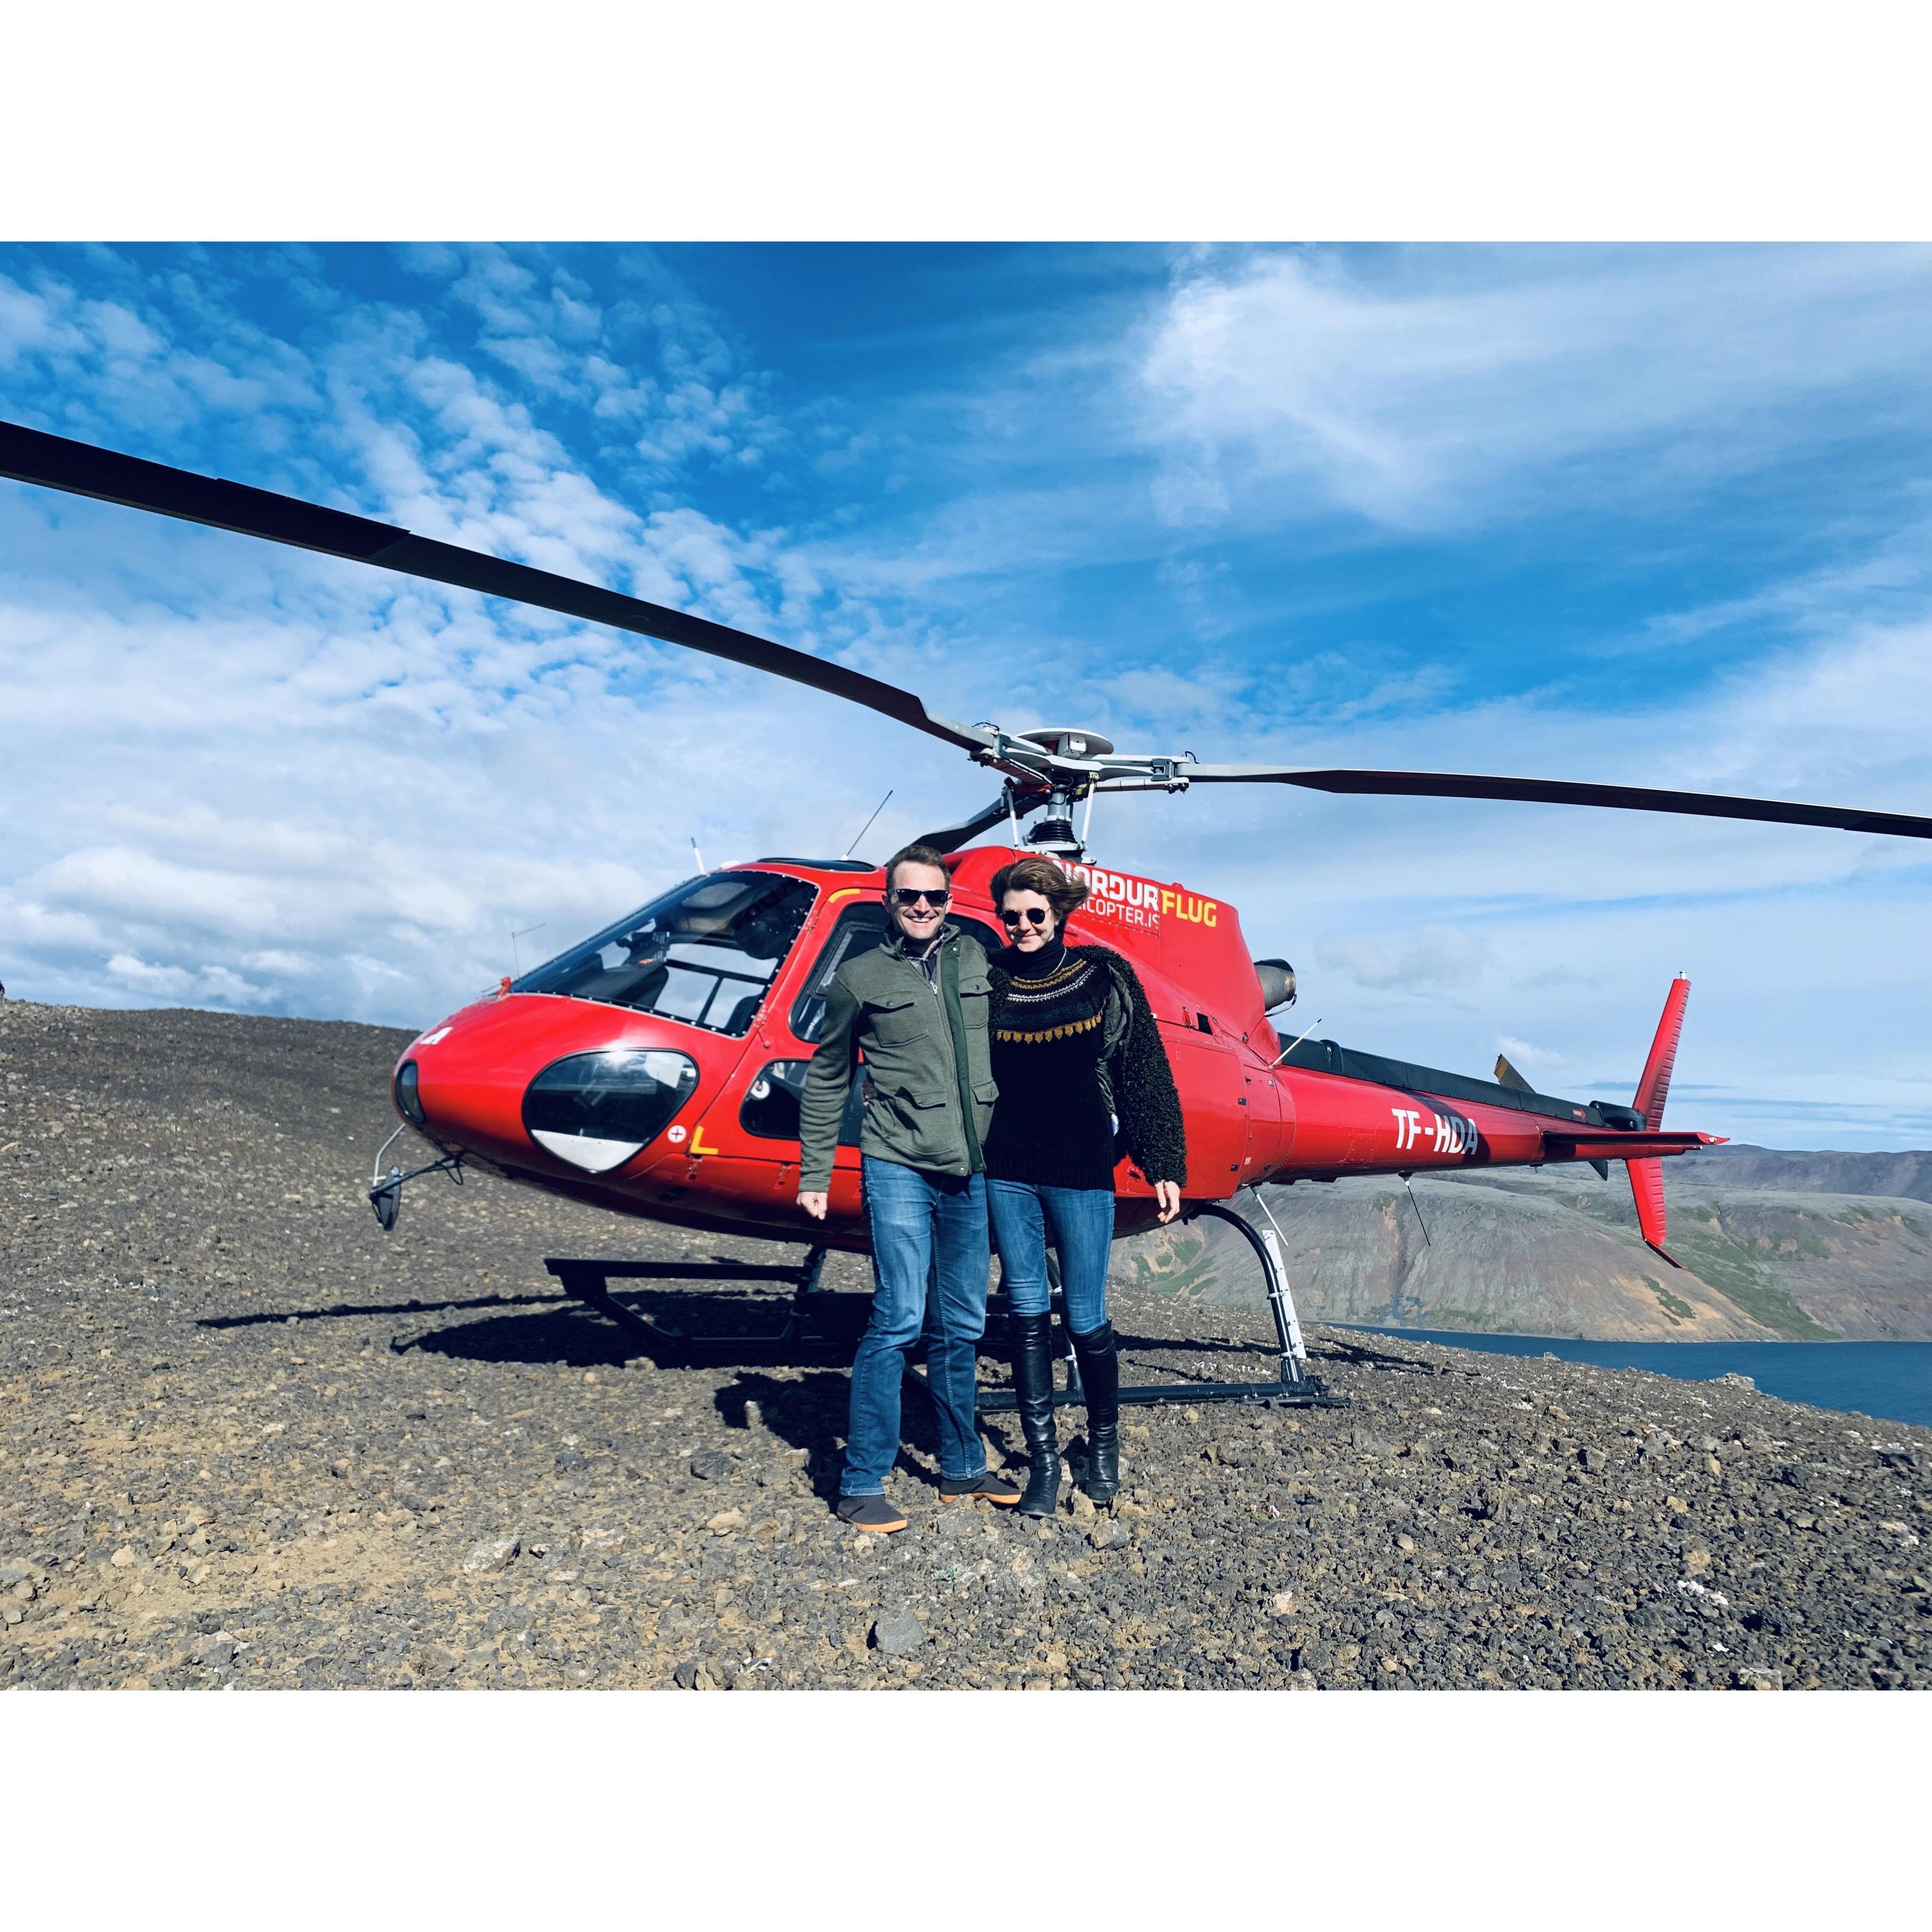 A windy helicopter ride in Reykjavik